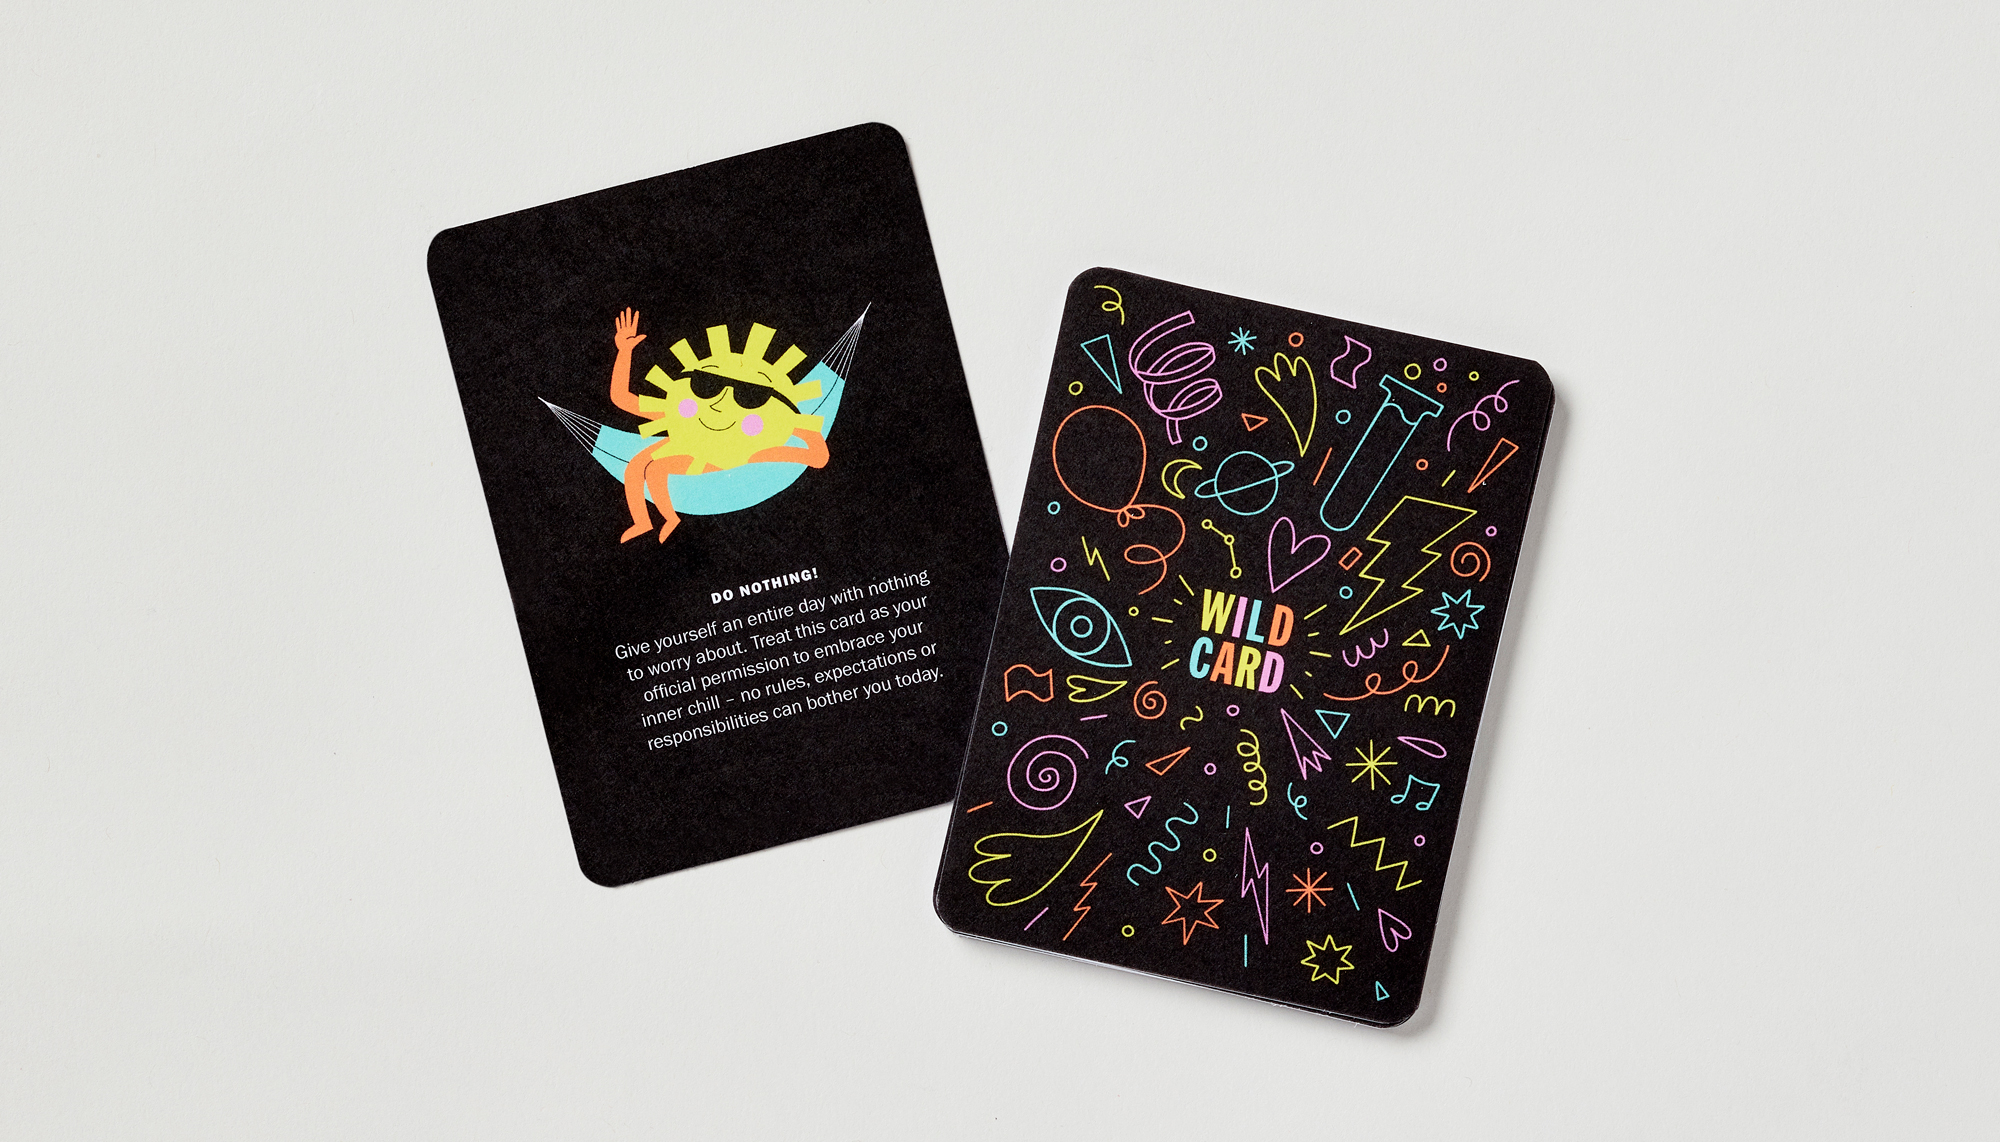 Front and back of a 'wild card' mental health activity card